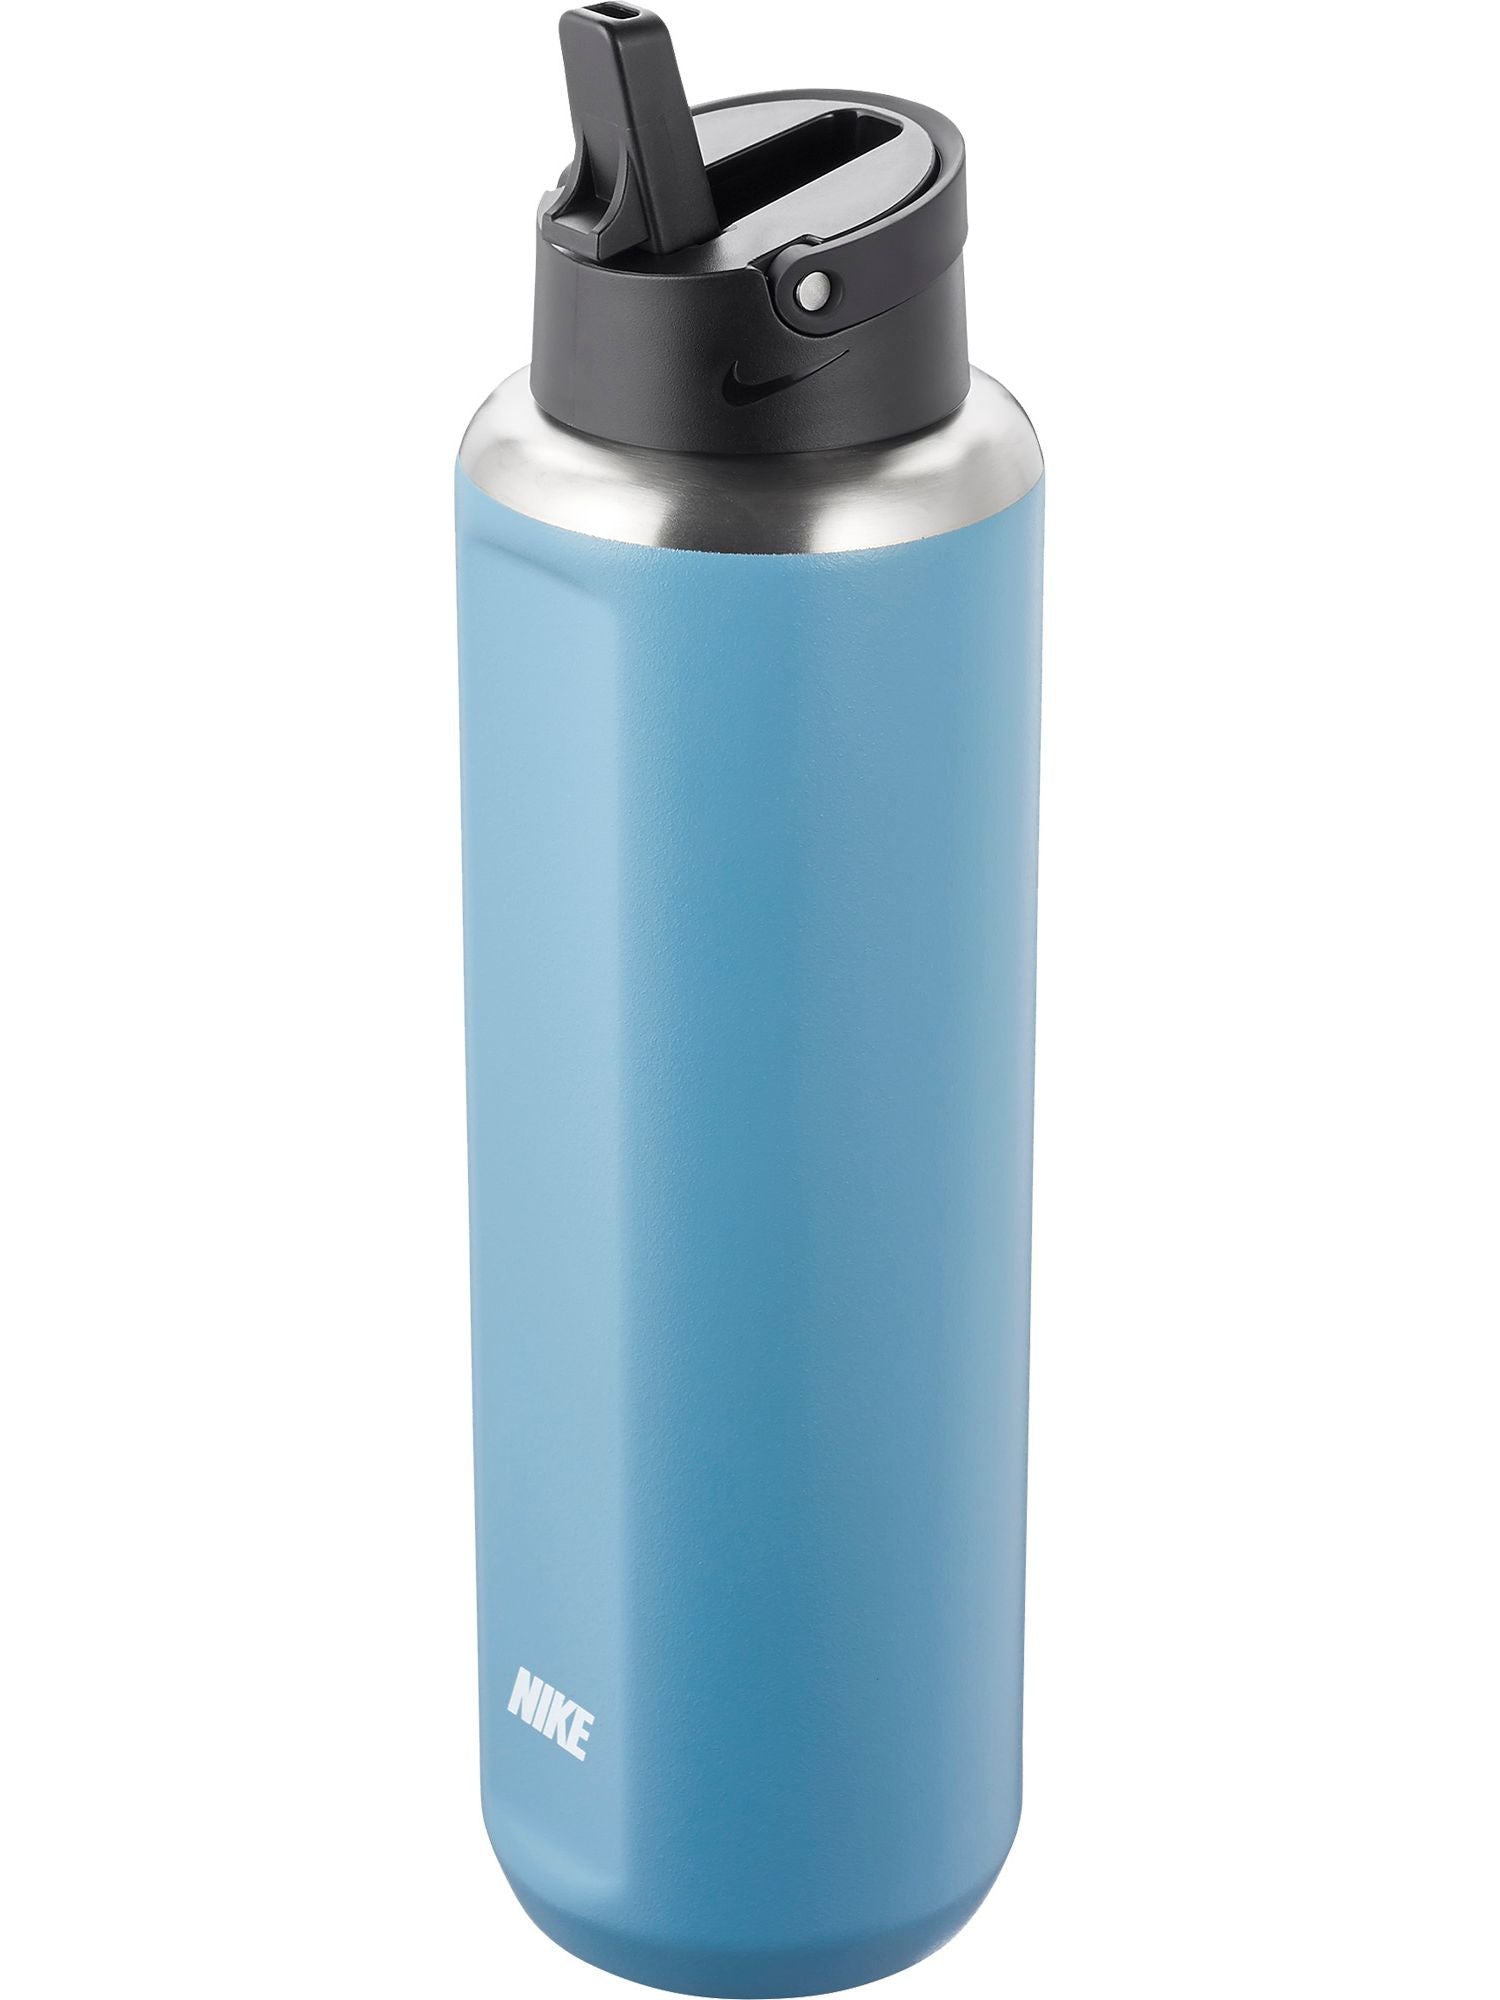 Nike Recharge Stainless Steel Straw Bottle (32 oz)-Cerulean/Black/White